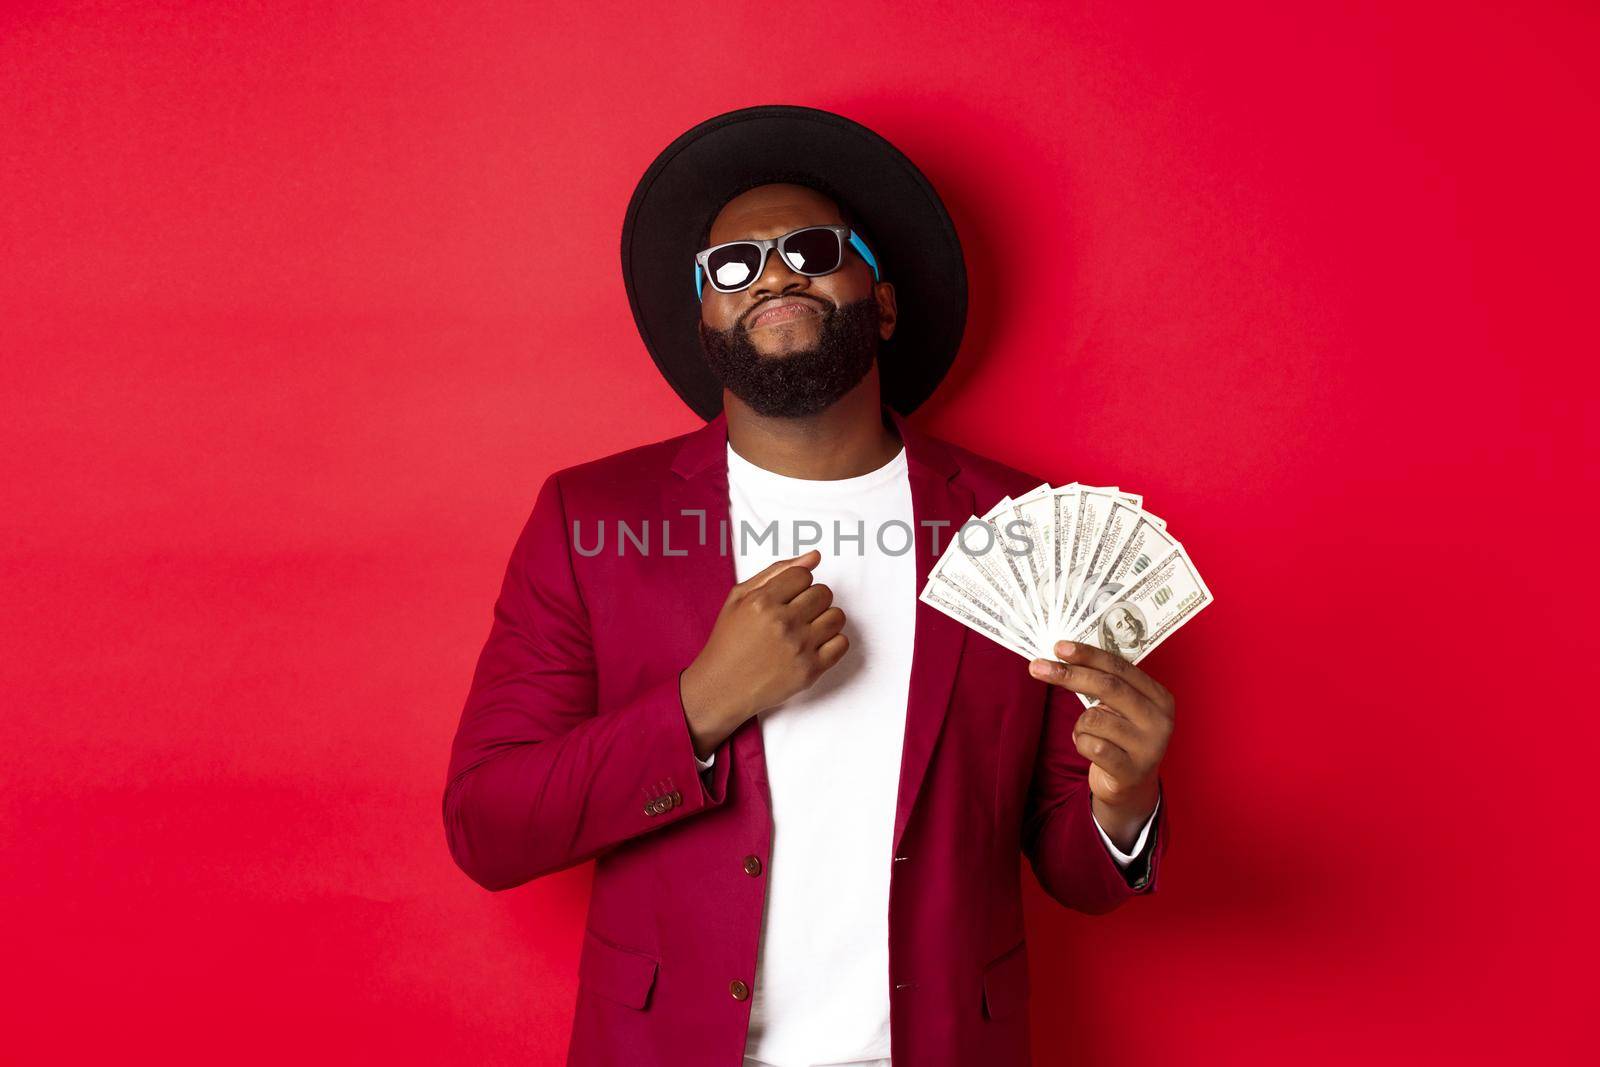 Sassy and cool african american man in sunglasses and hat, pointing at himself and showing dollars, looking confident against red background.